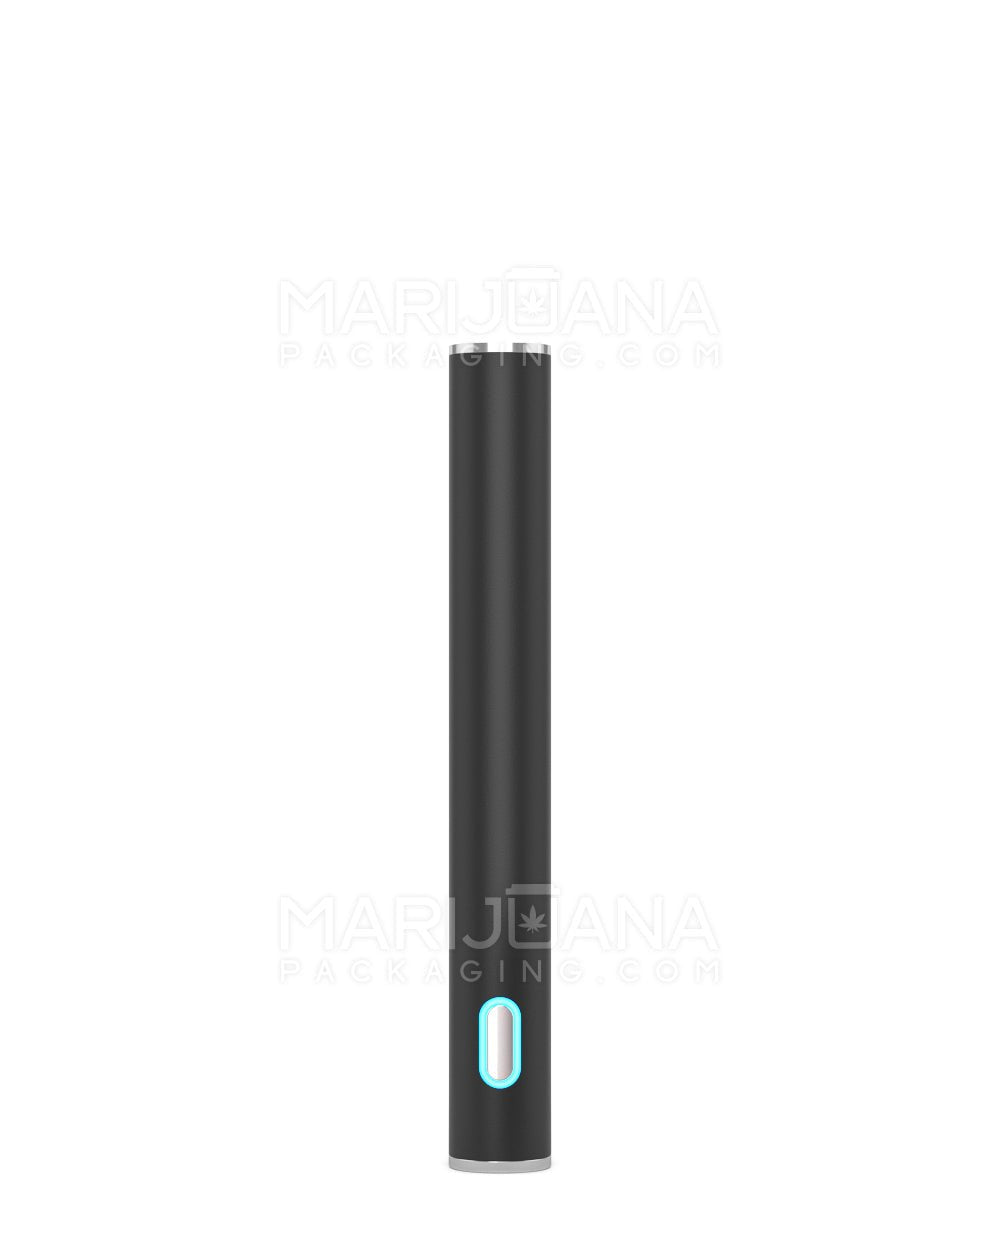 RAE | Instant Draw Activated Vape Battery | 320mAh - Black - 640 Count - 1